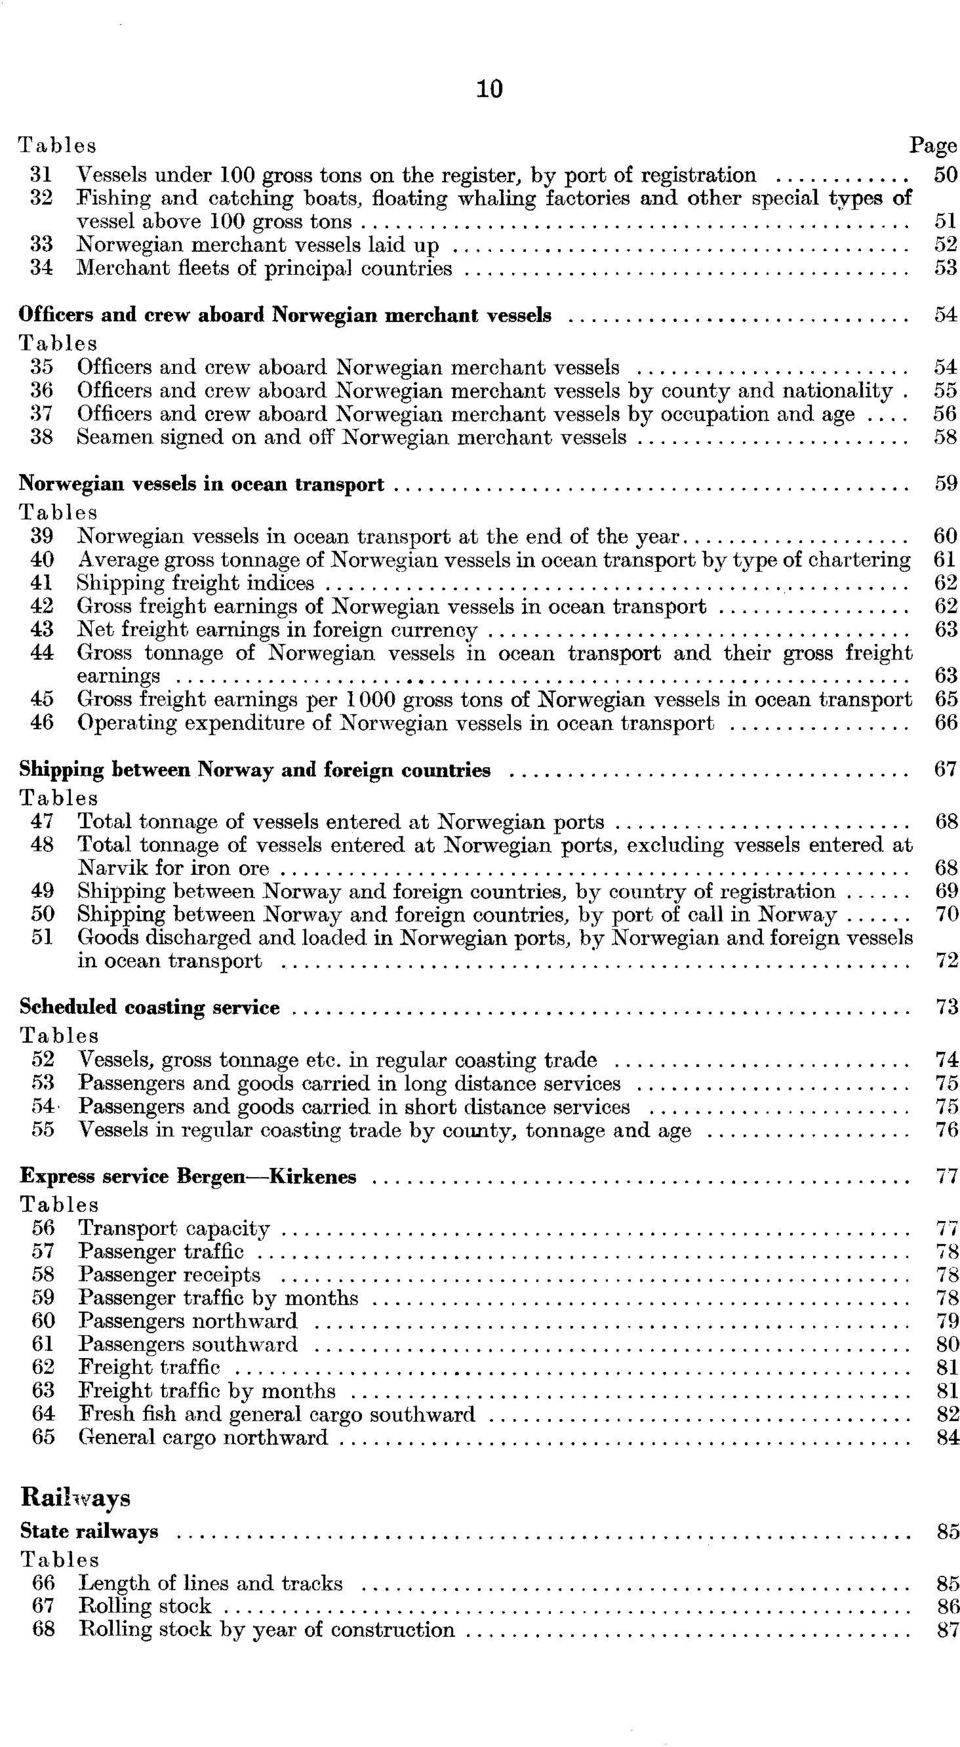 merchant vessels 54 36 Officers and crew aboard Norwegian merchant vessels by county and nationality 55 37 Officers and crew aboard Norwegian merchant vessels by occupation and age.